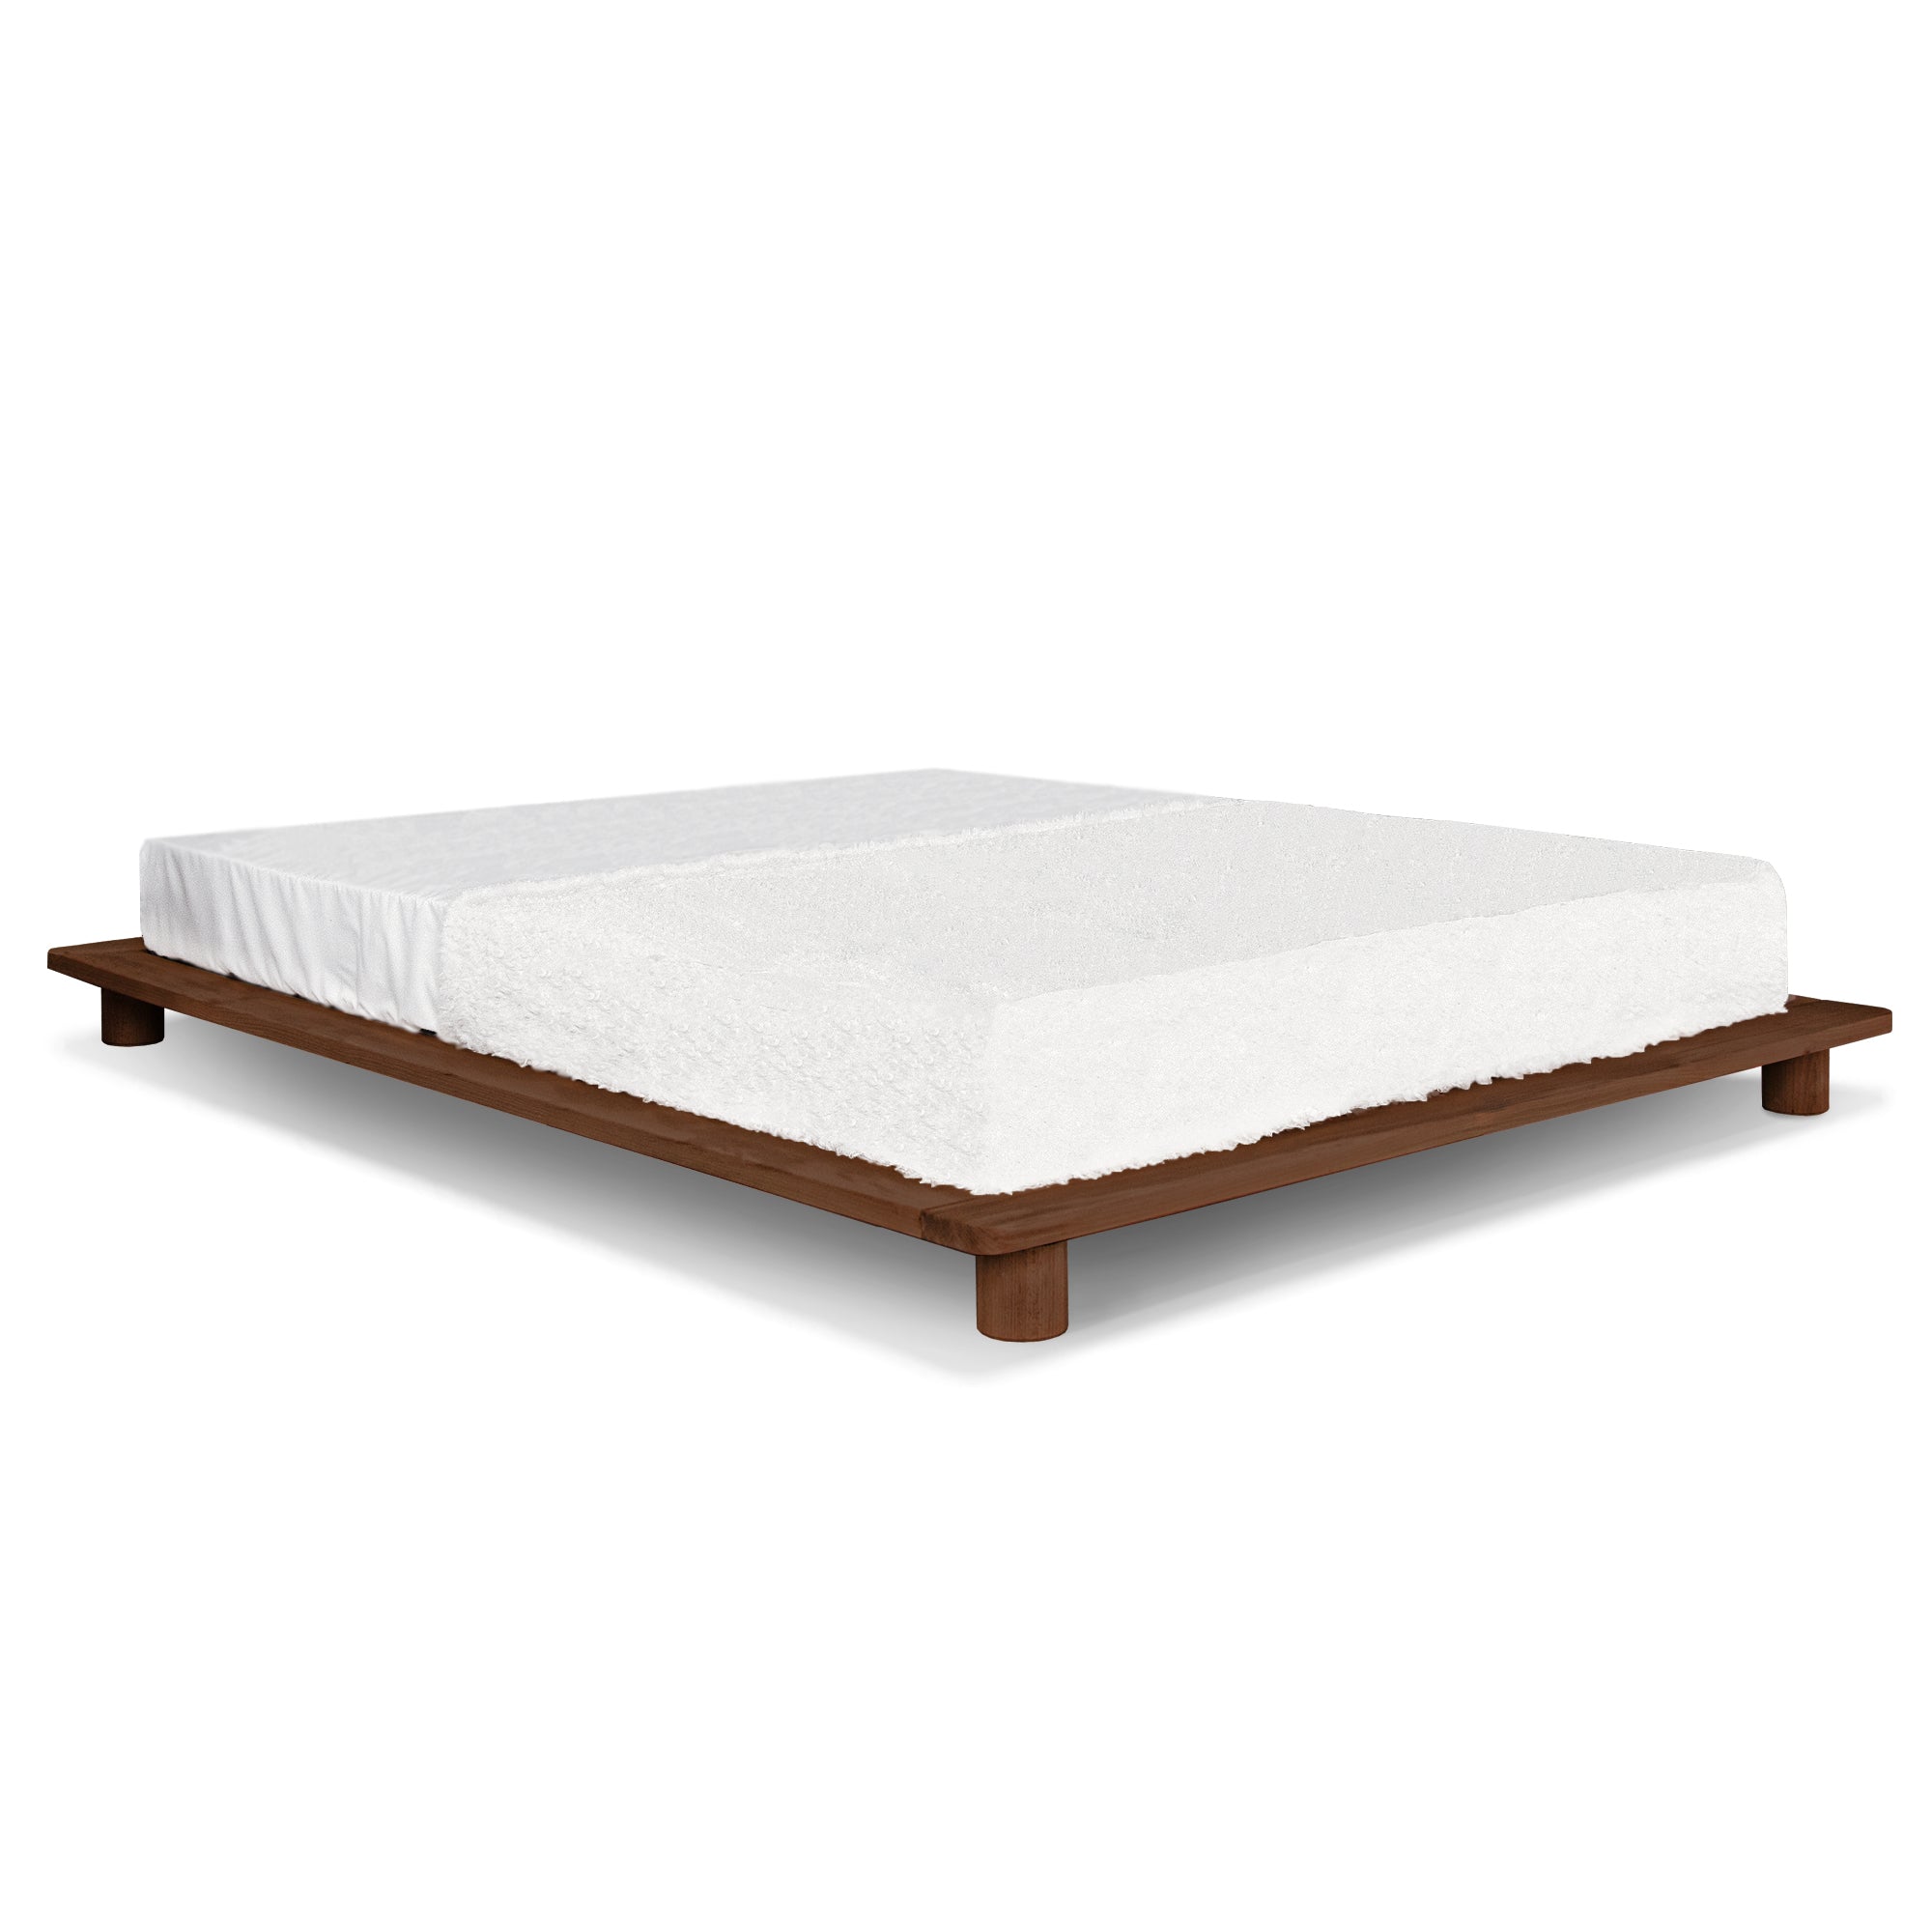 CONE Double Bed, Beech Wood -walnut frame